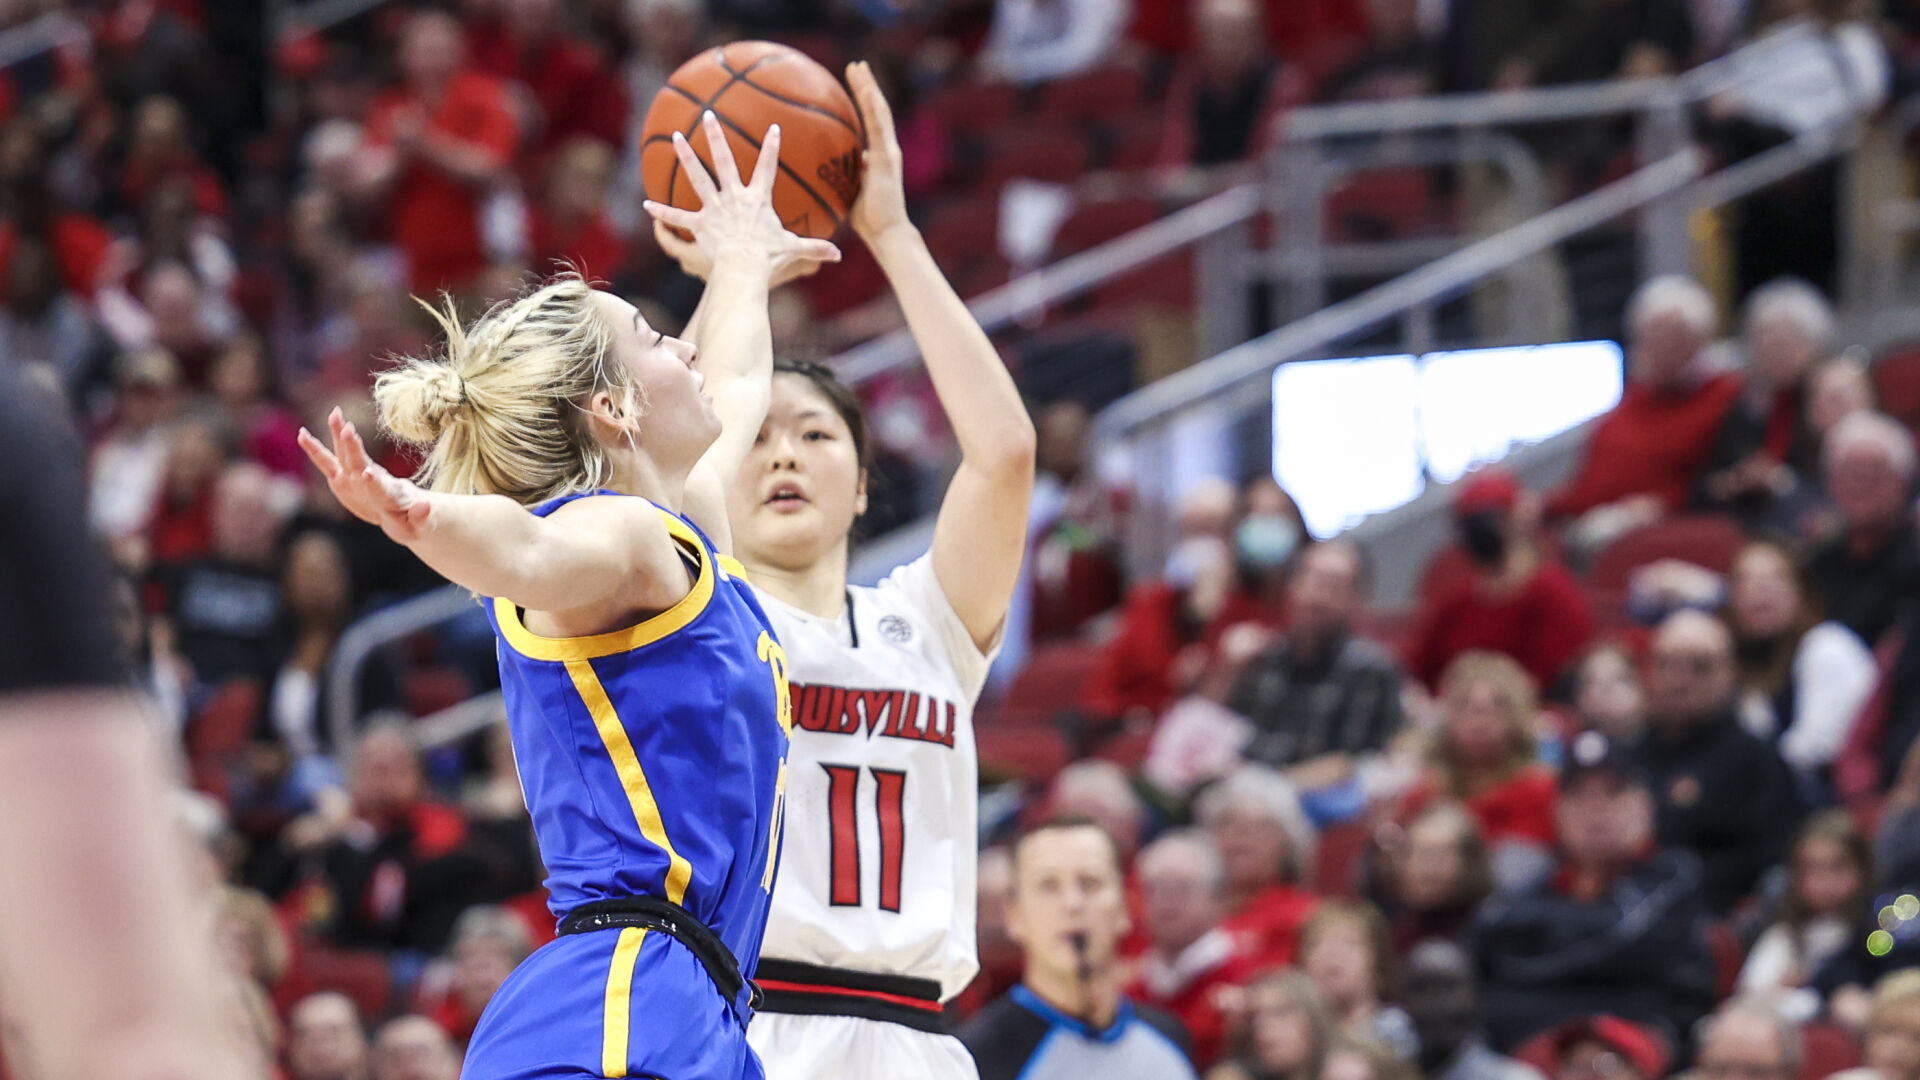 CRAWFORD | Louisville women have to scrap, pull away late to beat